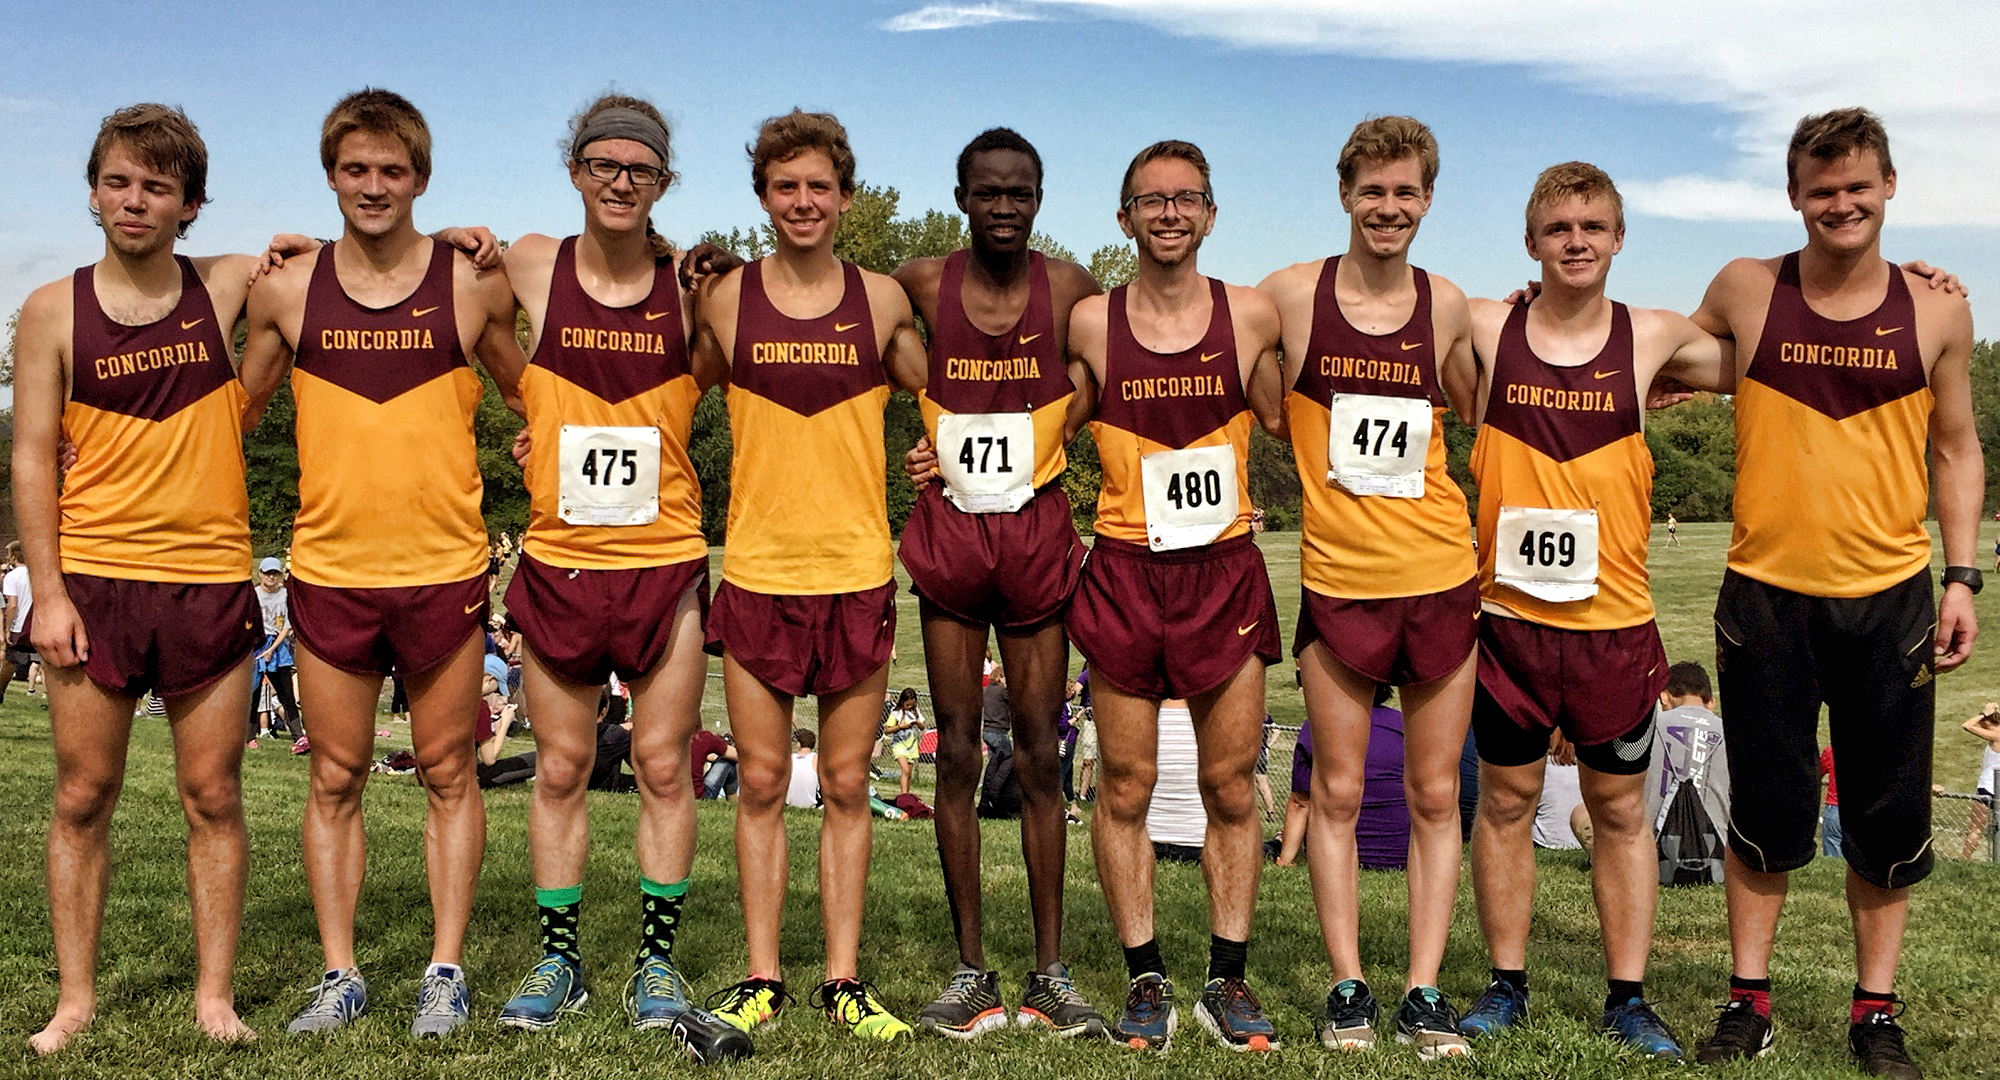 The Cobbers pose for a team pic after the St. Olaf Invitational.